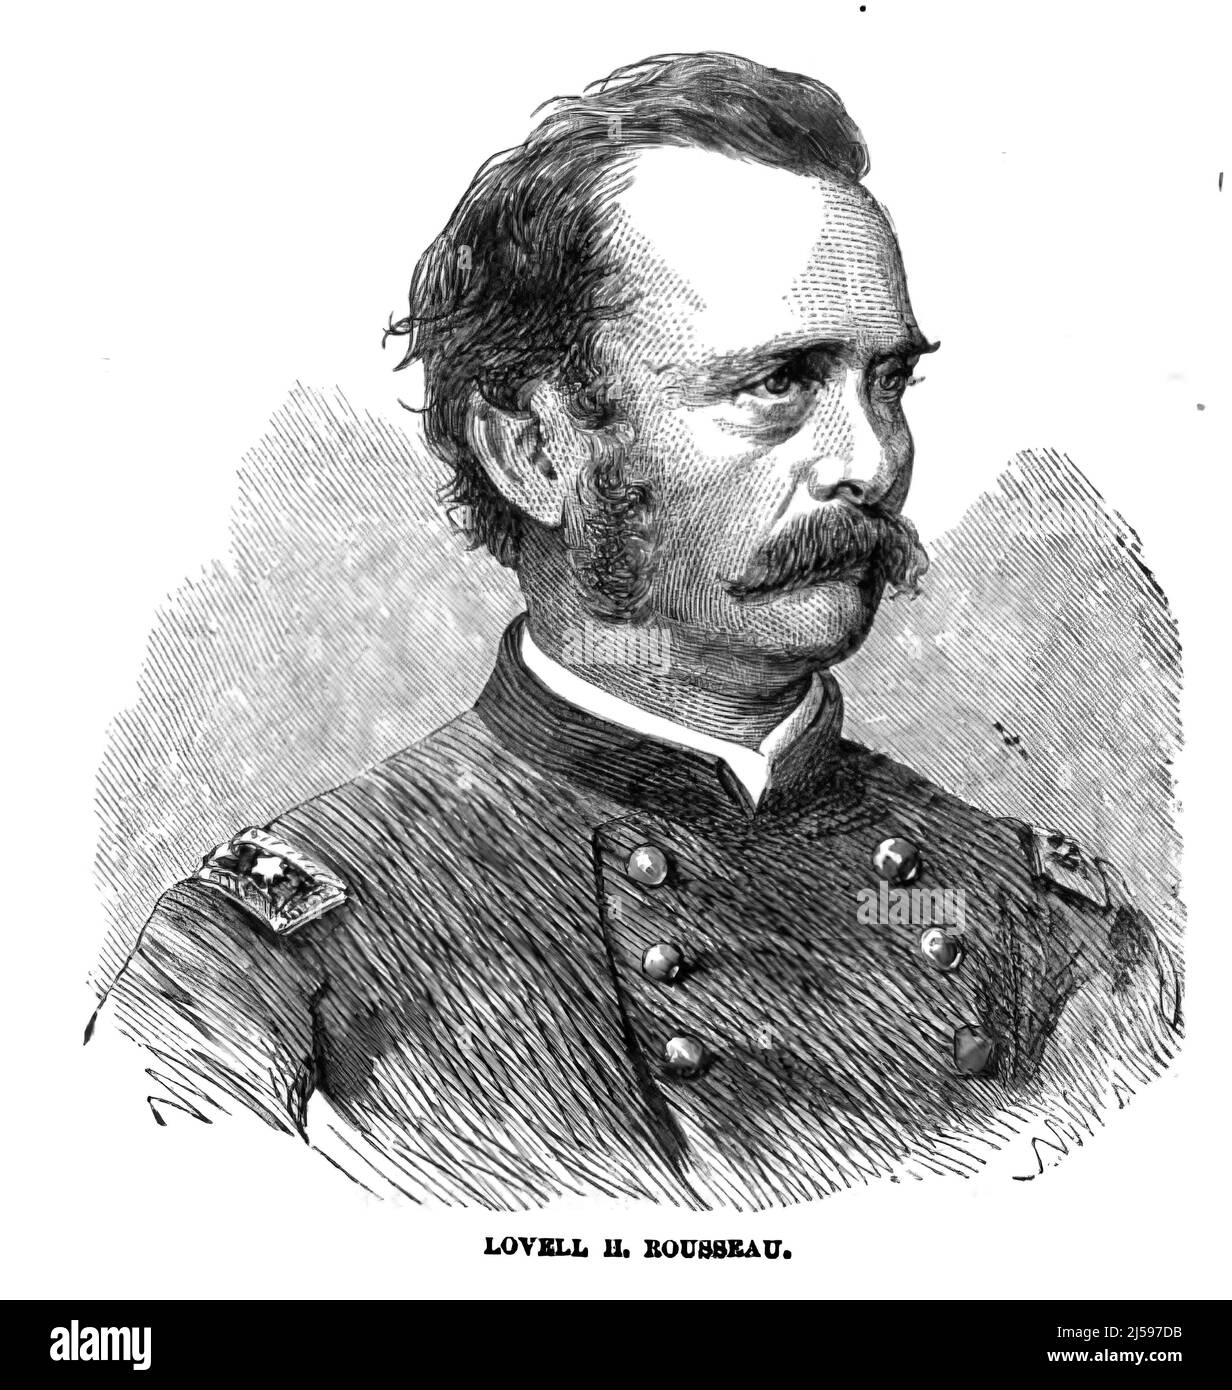 Portrait of Lovell Harrison Rousseau, Union Army General in the American Civil War. 19th century illustration Stock Photo